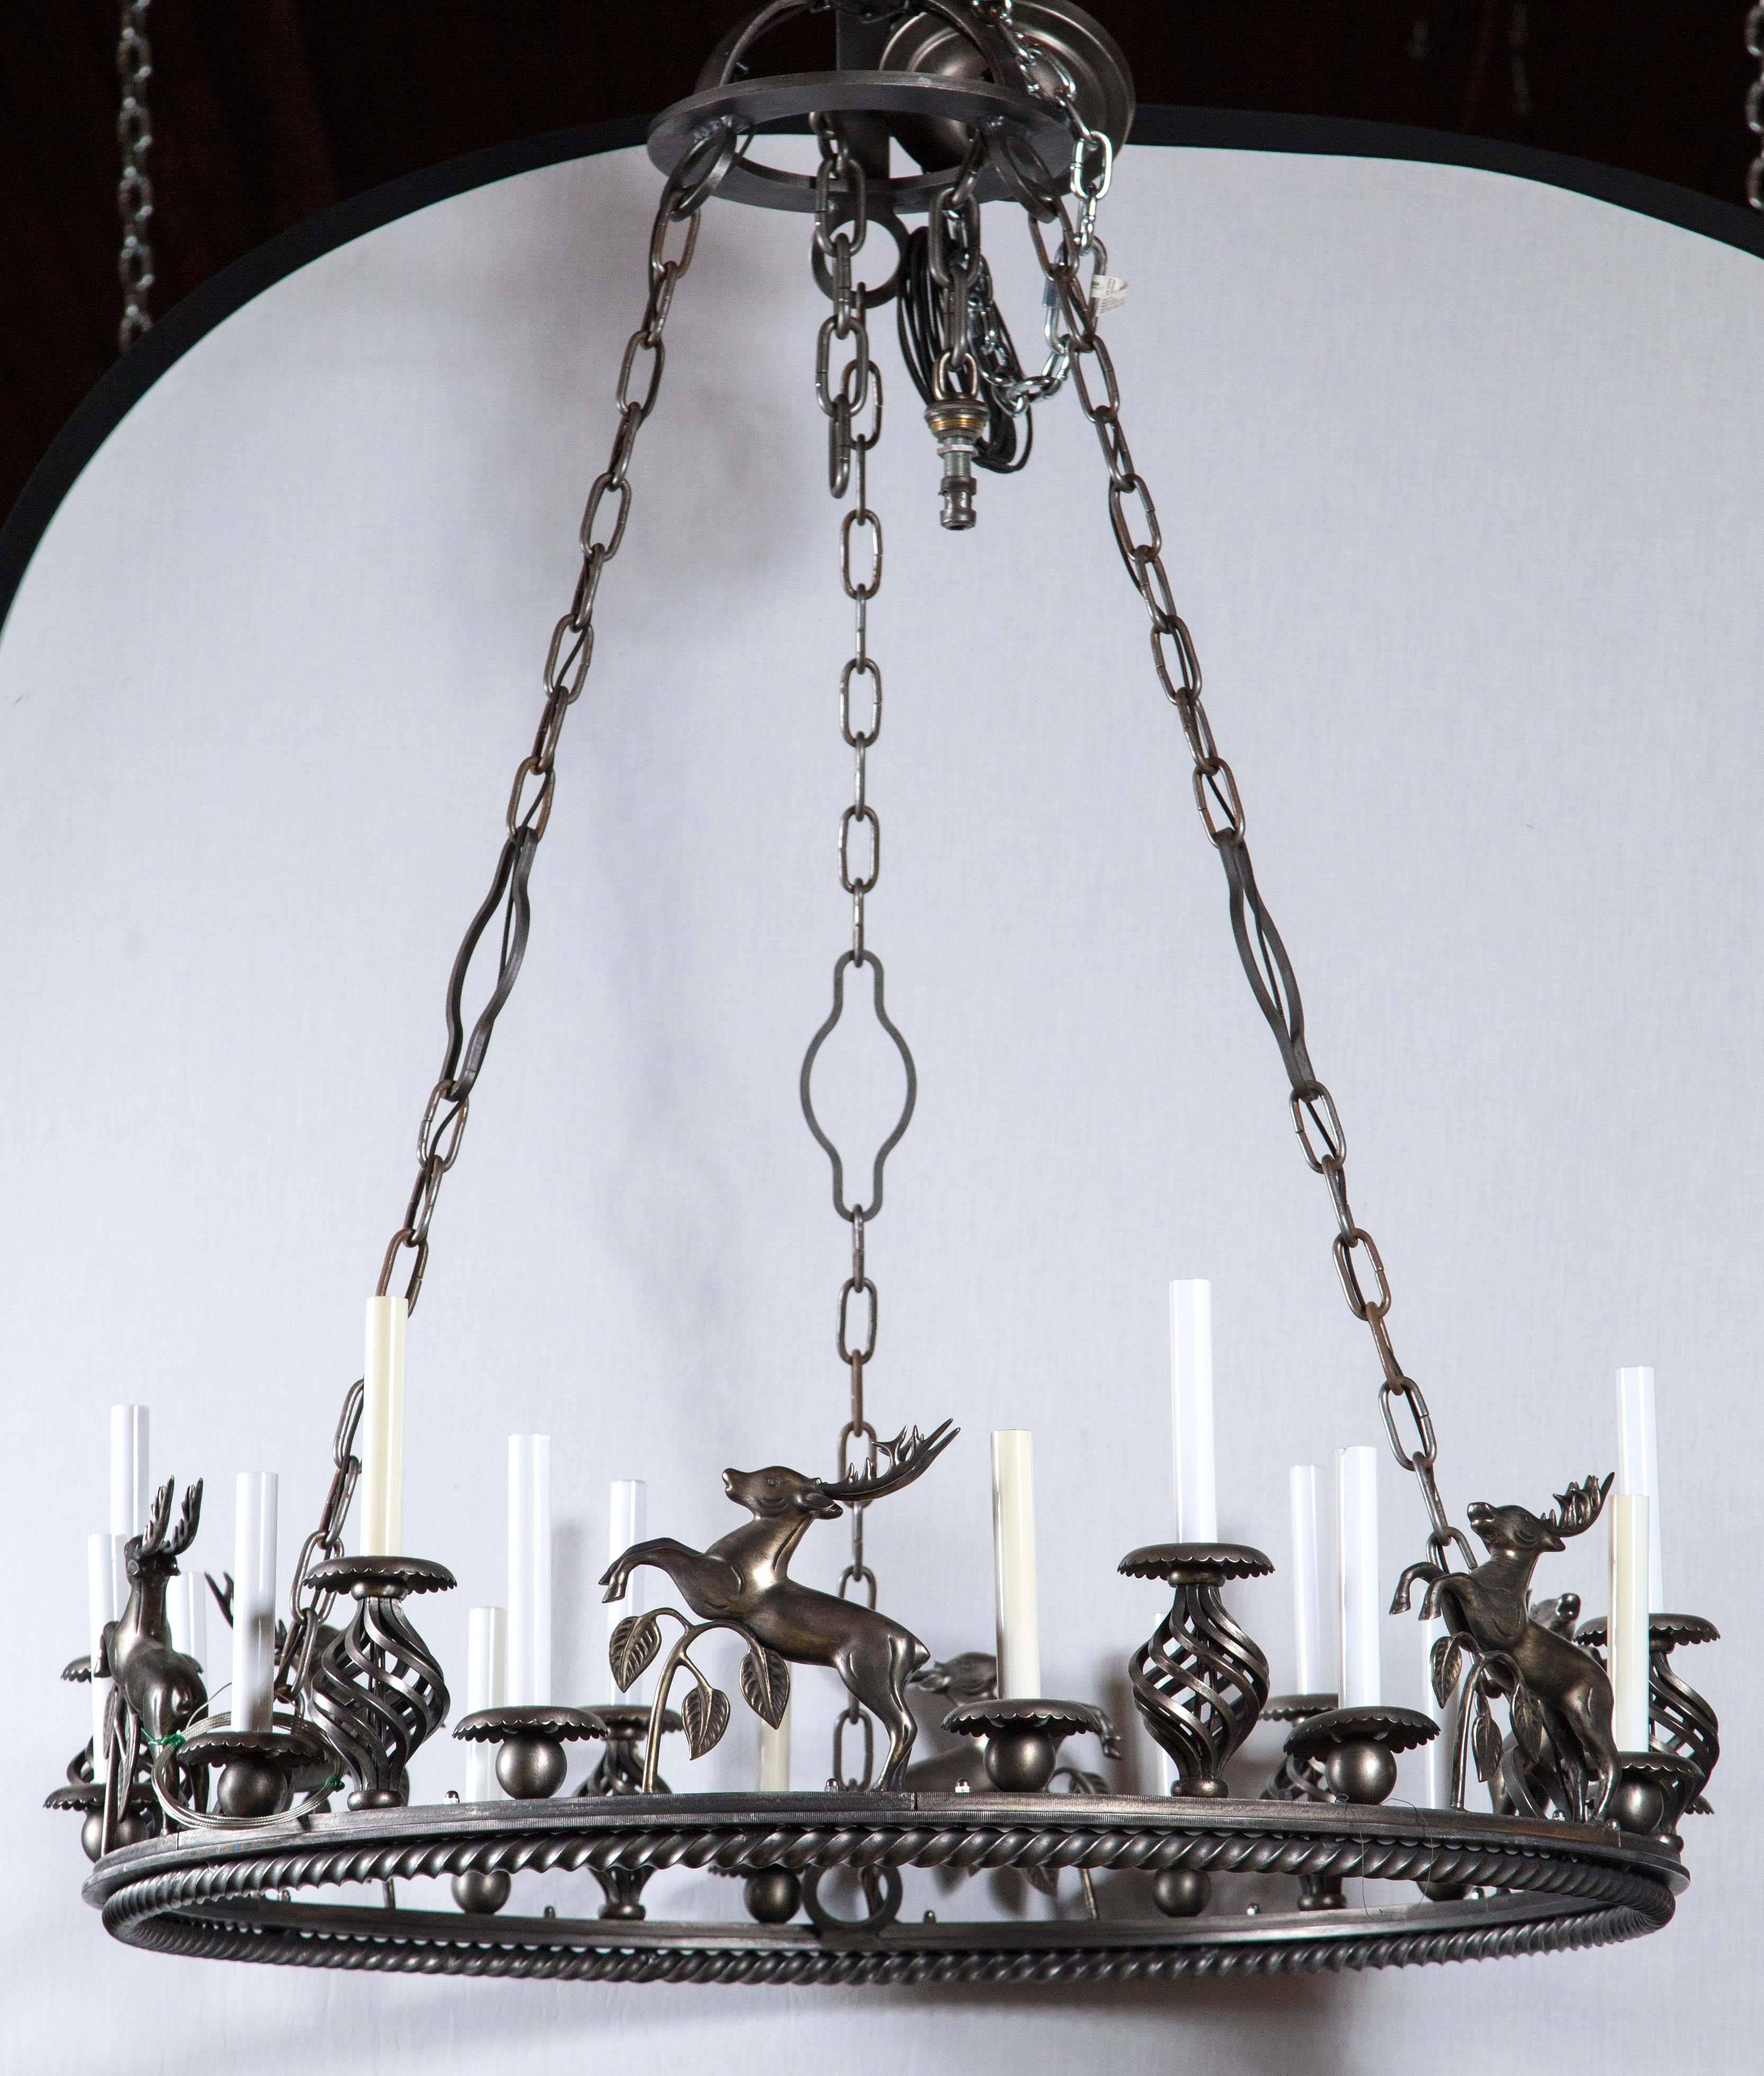 Fantastic 1970s custom-made leaping stag chandelier. New old stock. 18 lights. 
The fixture itself is 12.5